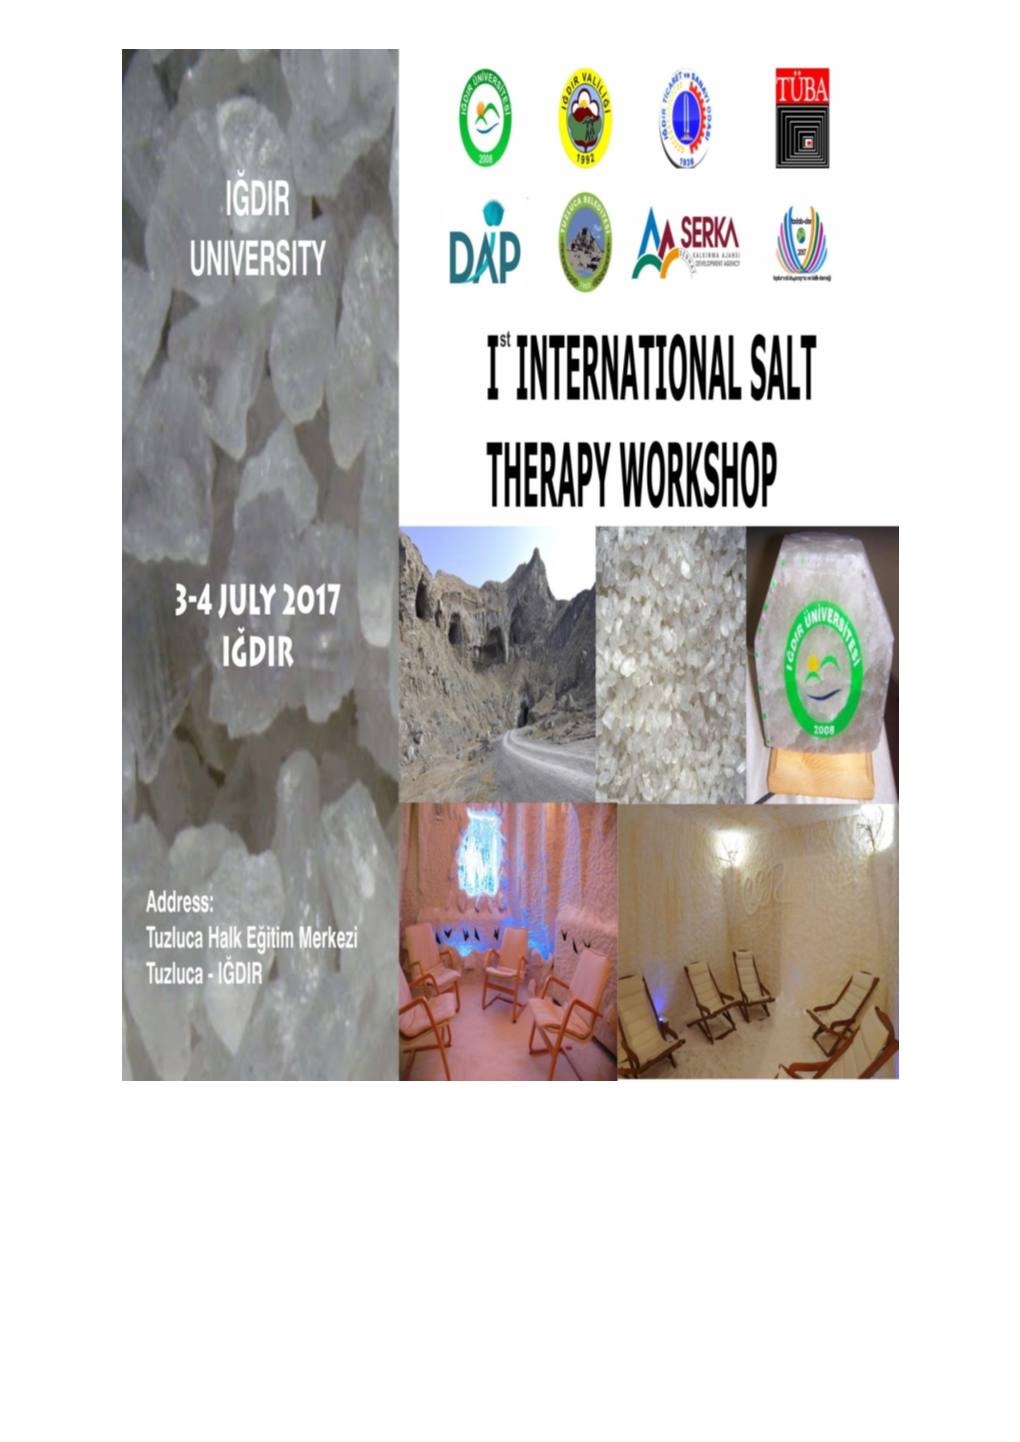 The FIRST INTERNATIONAL SALT THERAPY WORKSHOP